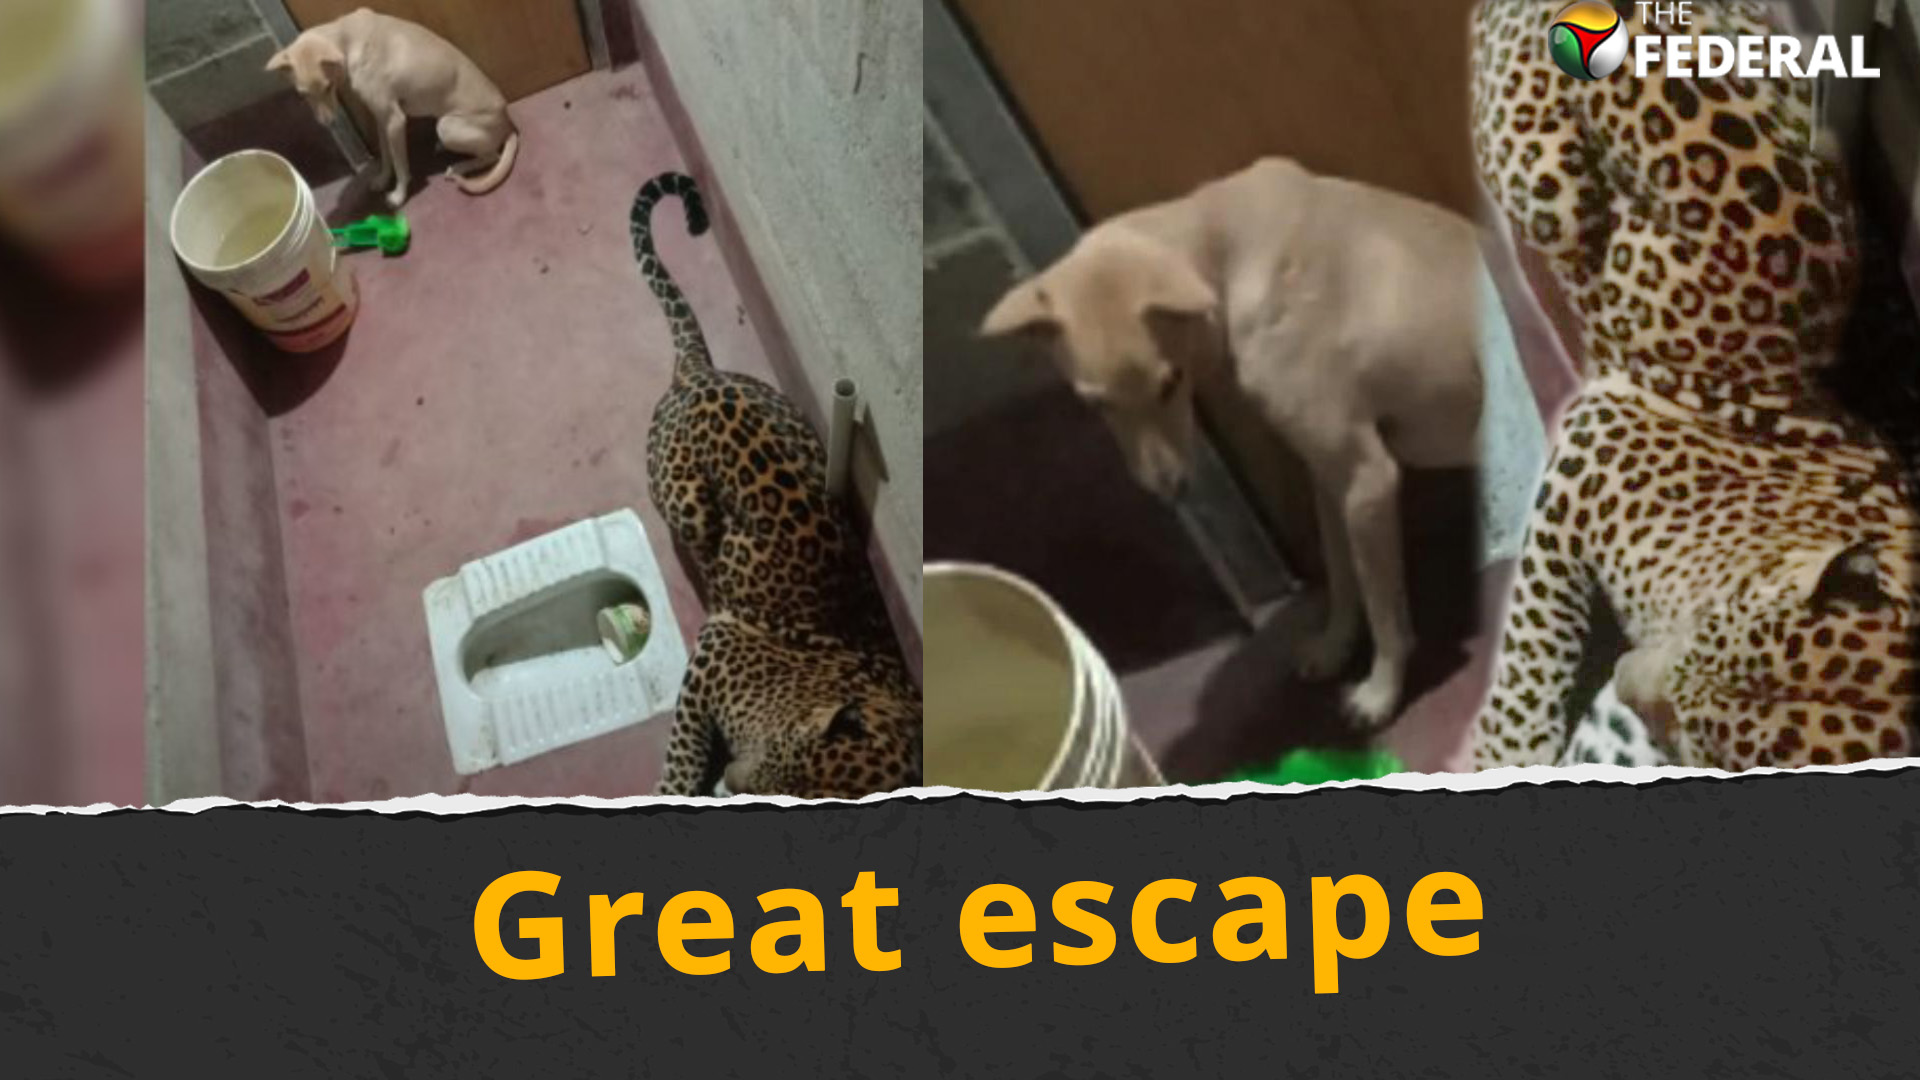 Leopard, dog share toilet space for 9 hours